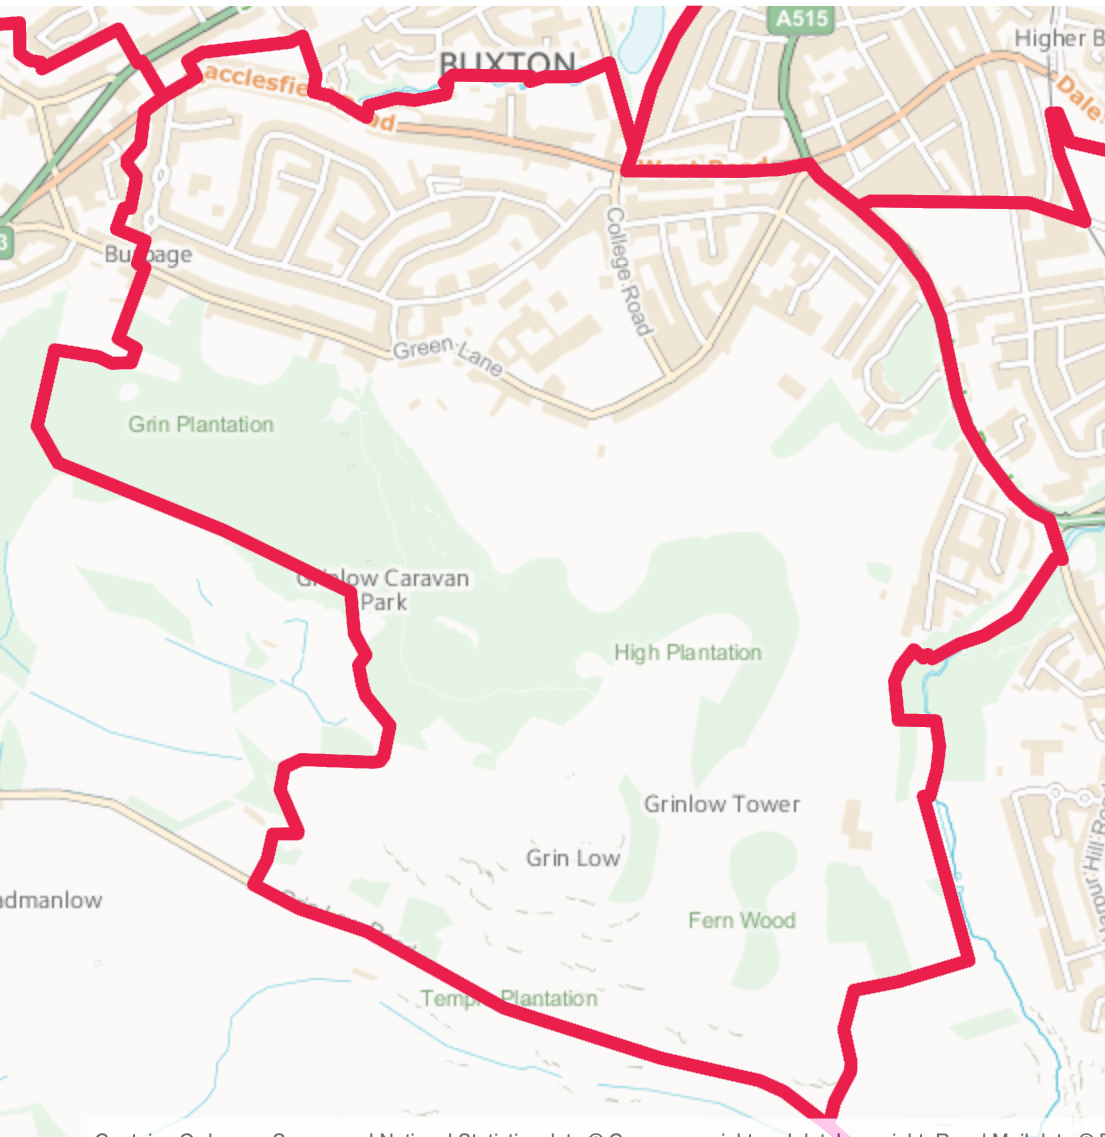 Map of Temple Ward